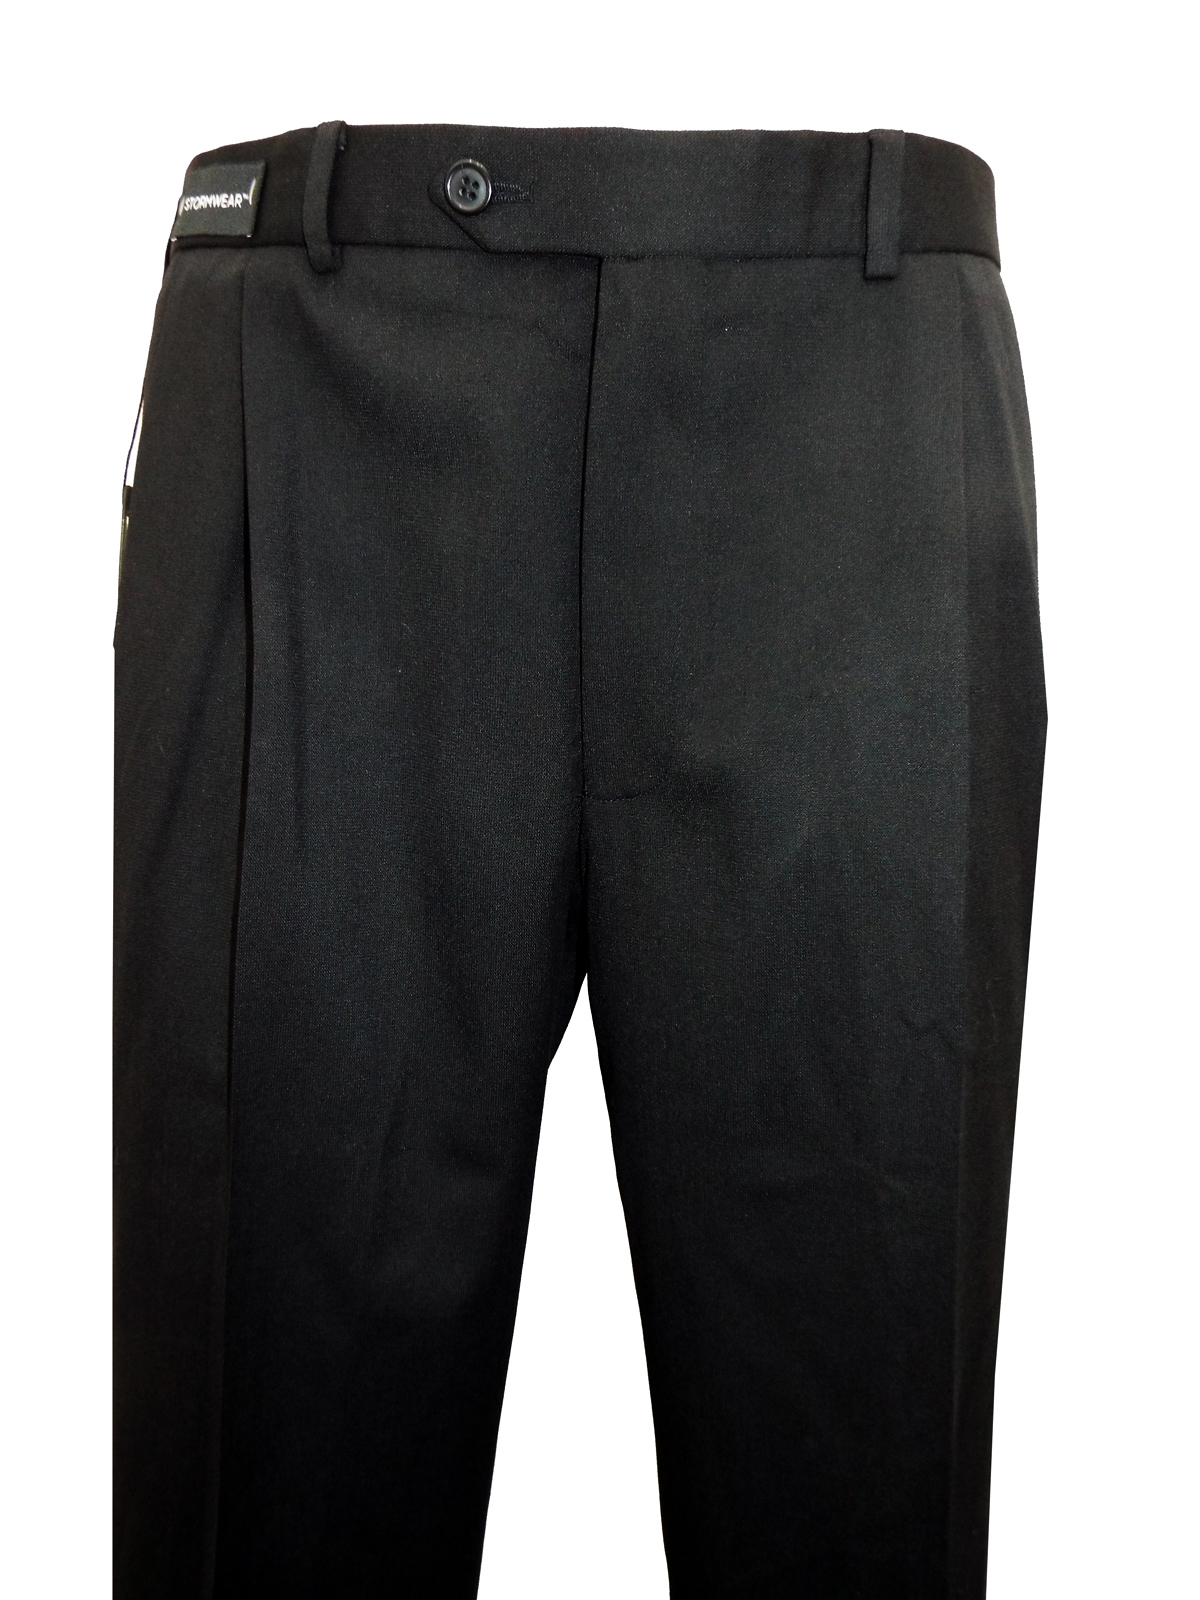 Marks and Spencer - - M&5 BLACK Wool Blend Single Pleat Trousers w ...